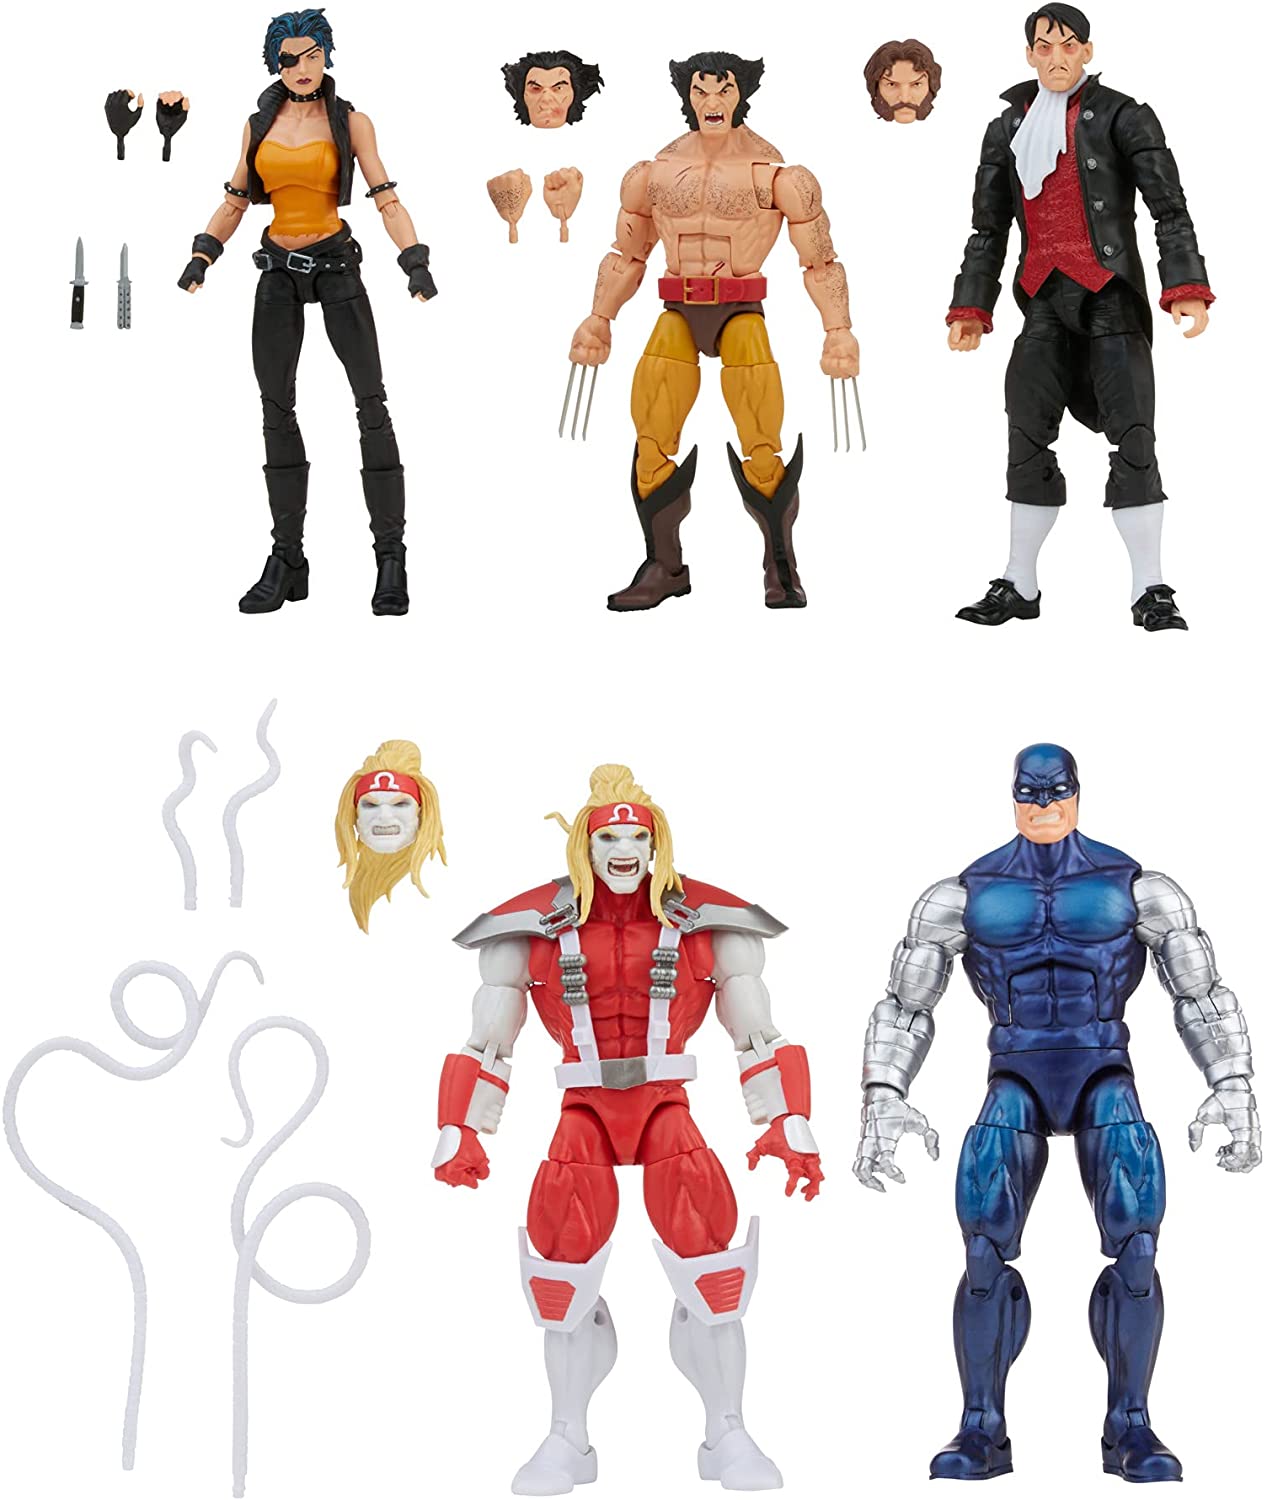 Marvel Legends Wolverine 5 Pack with Omega Red, Cyber, Callisto, Jason Wyngarde Action Figures